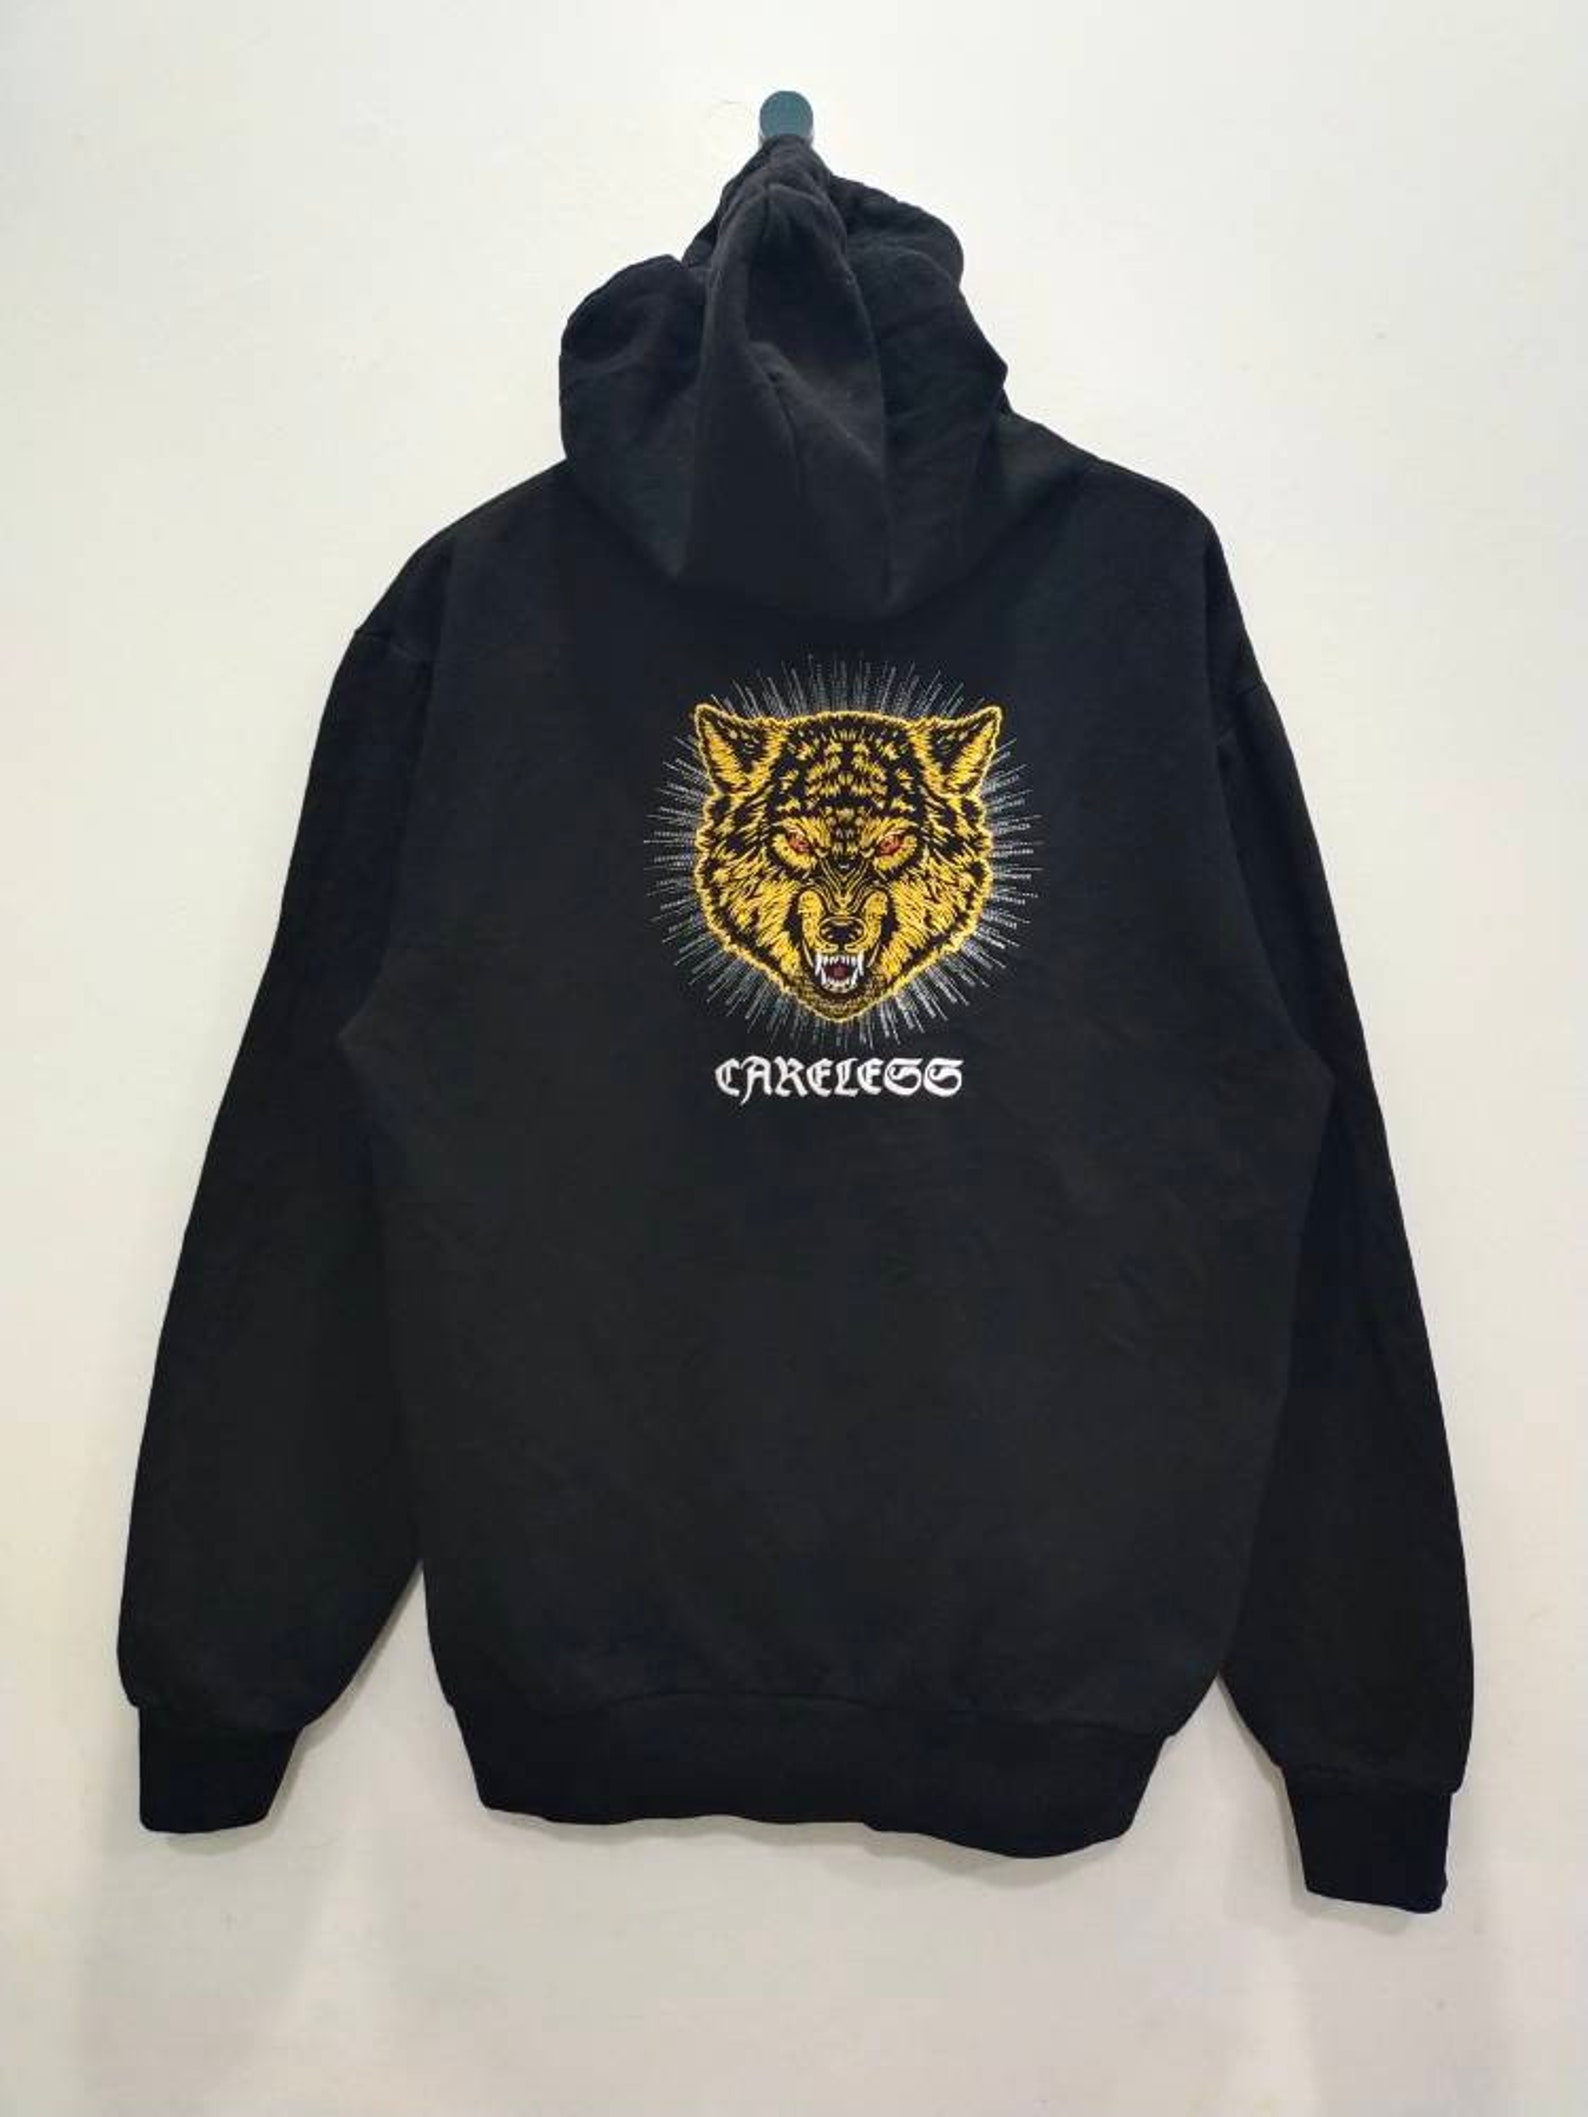 H&M Careless Hoodie Big Tiger Embroidery Size M - Etsy UK